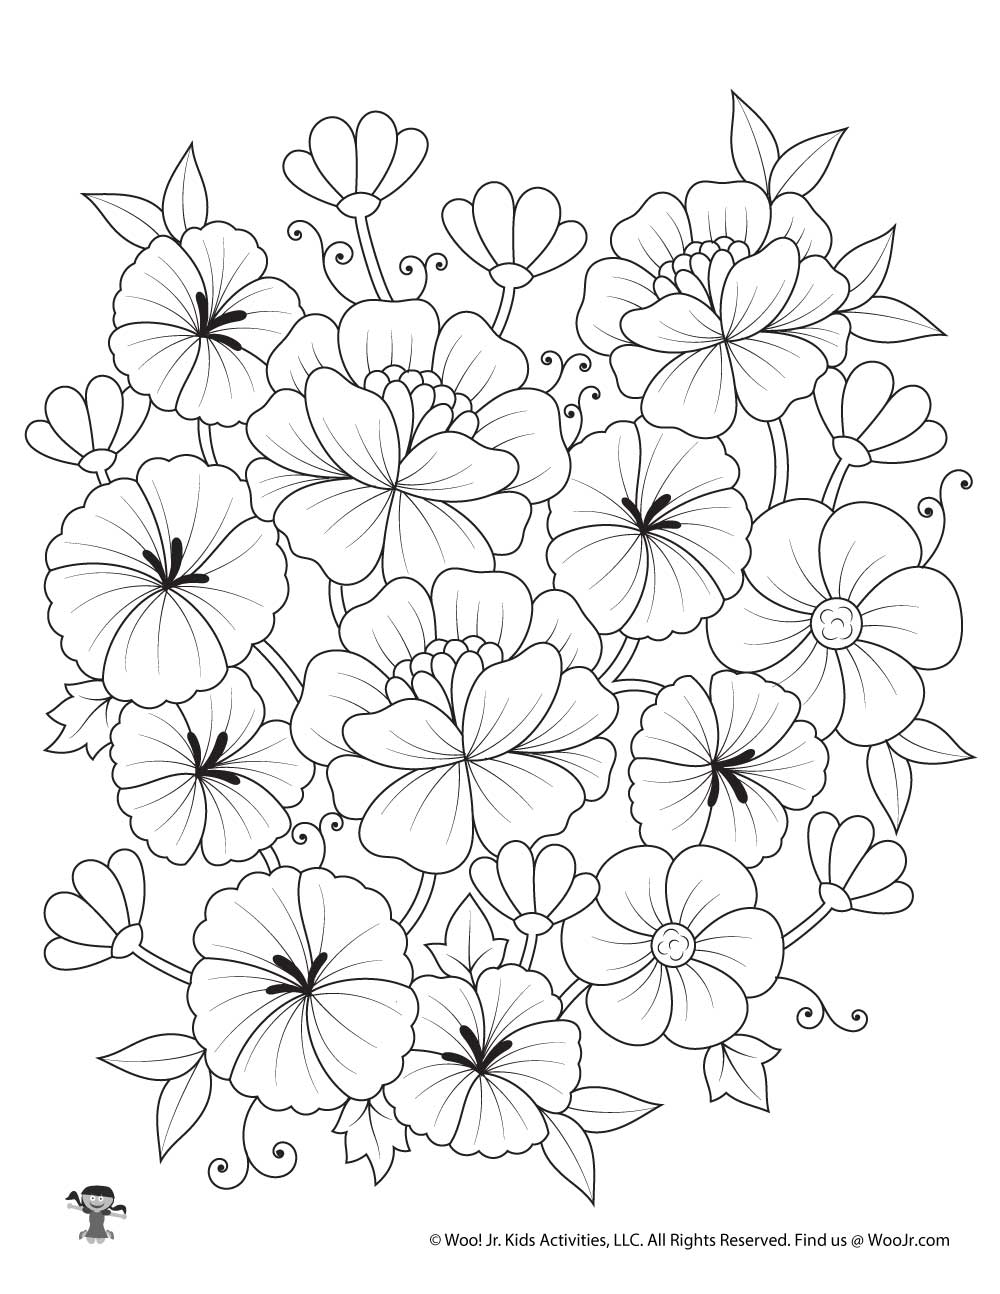 Flowers to Color and Print - Free Printable Flower Coloring Pages - all